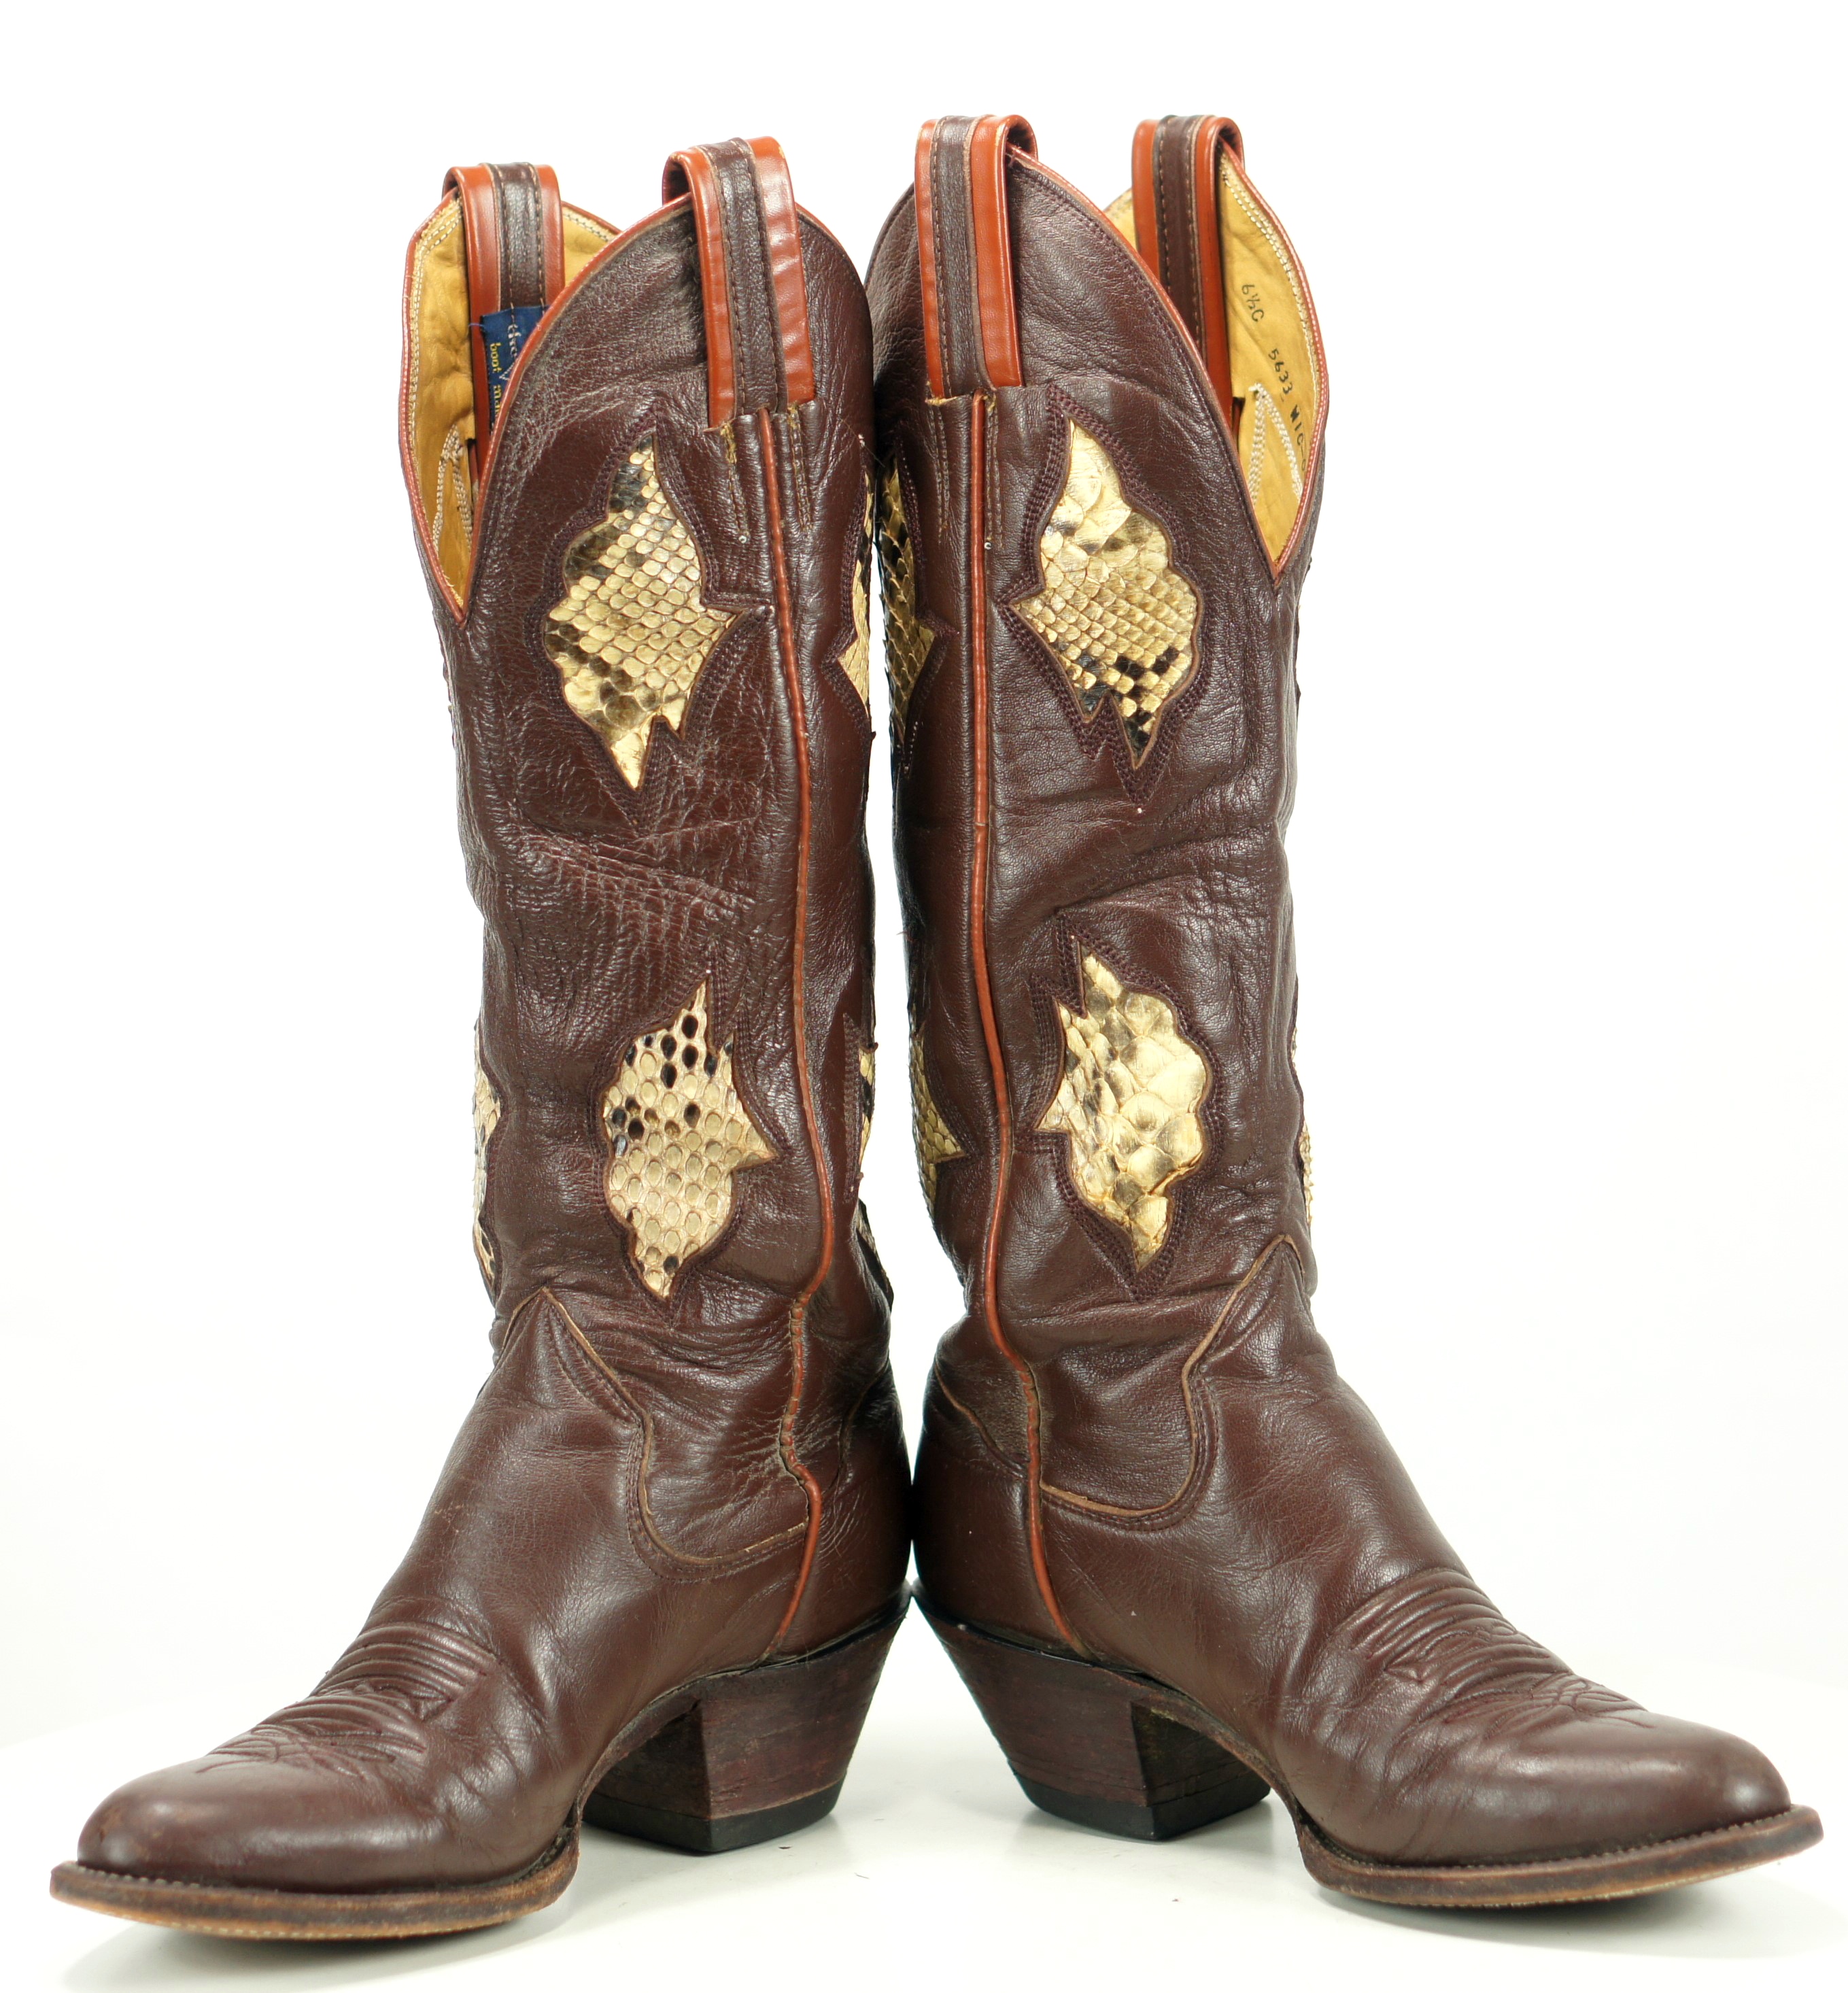 Sanders Vintage Womens 17 Inch Tall Cowboy Boots Brown Leather Inlay